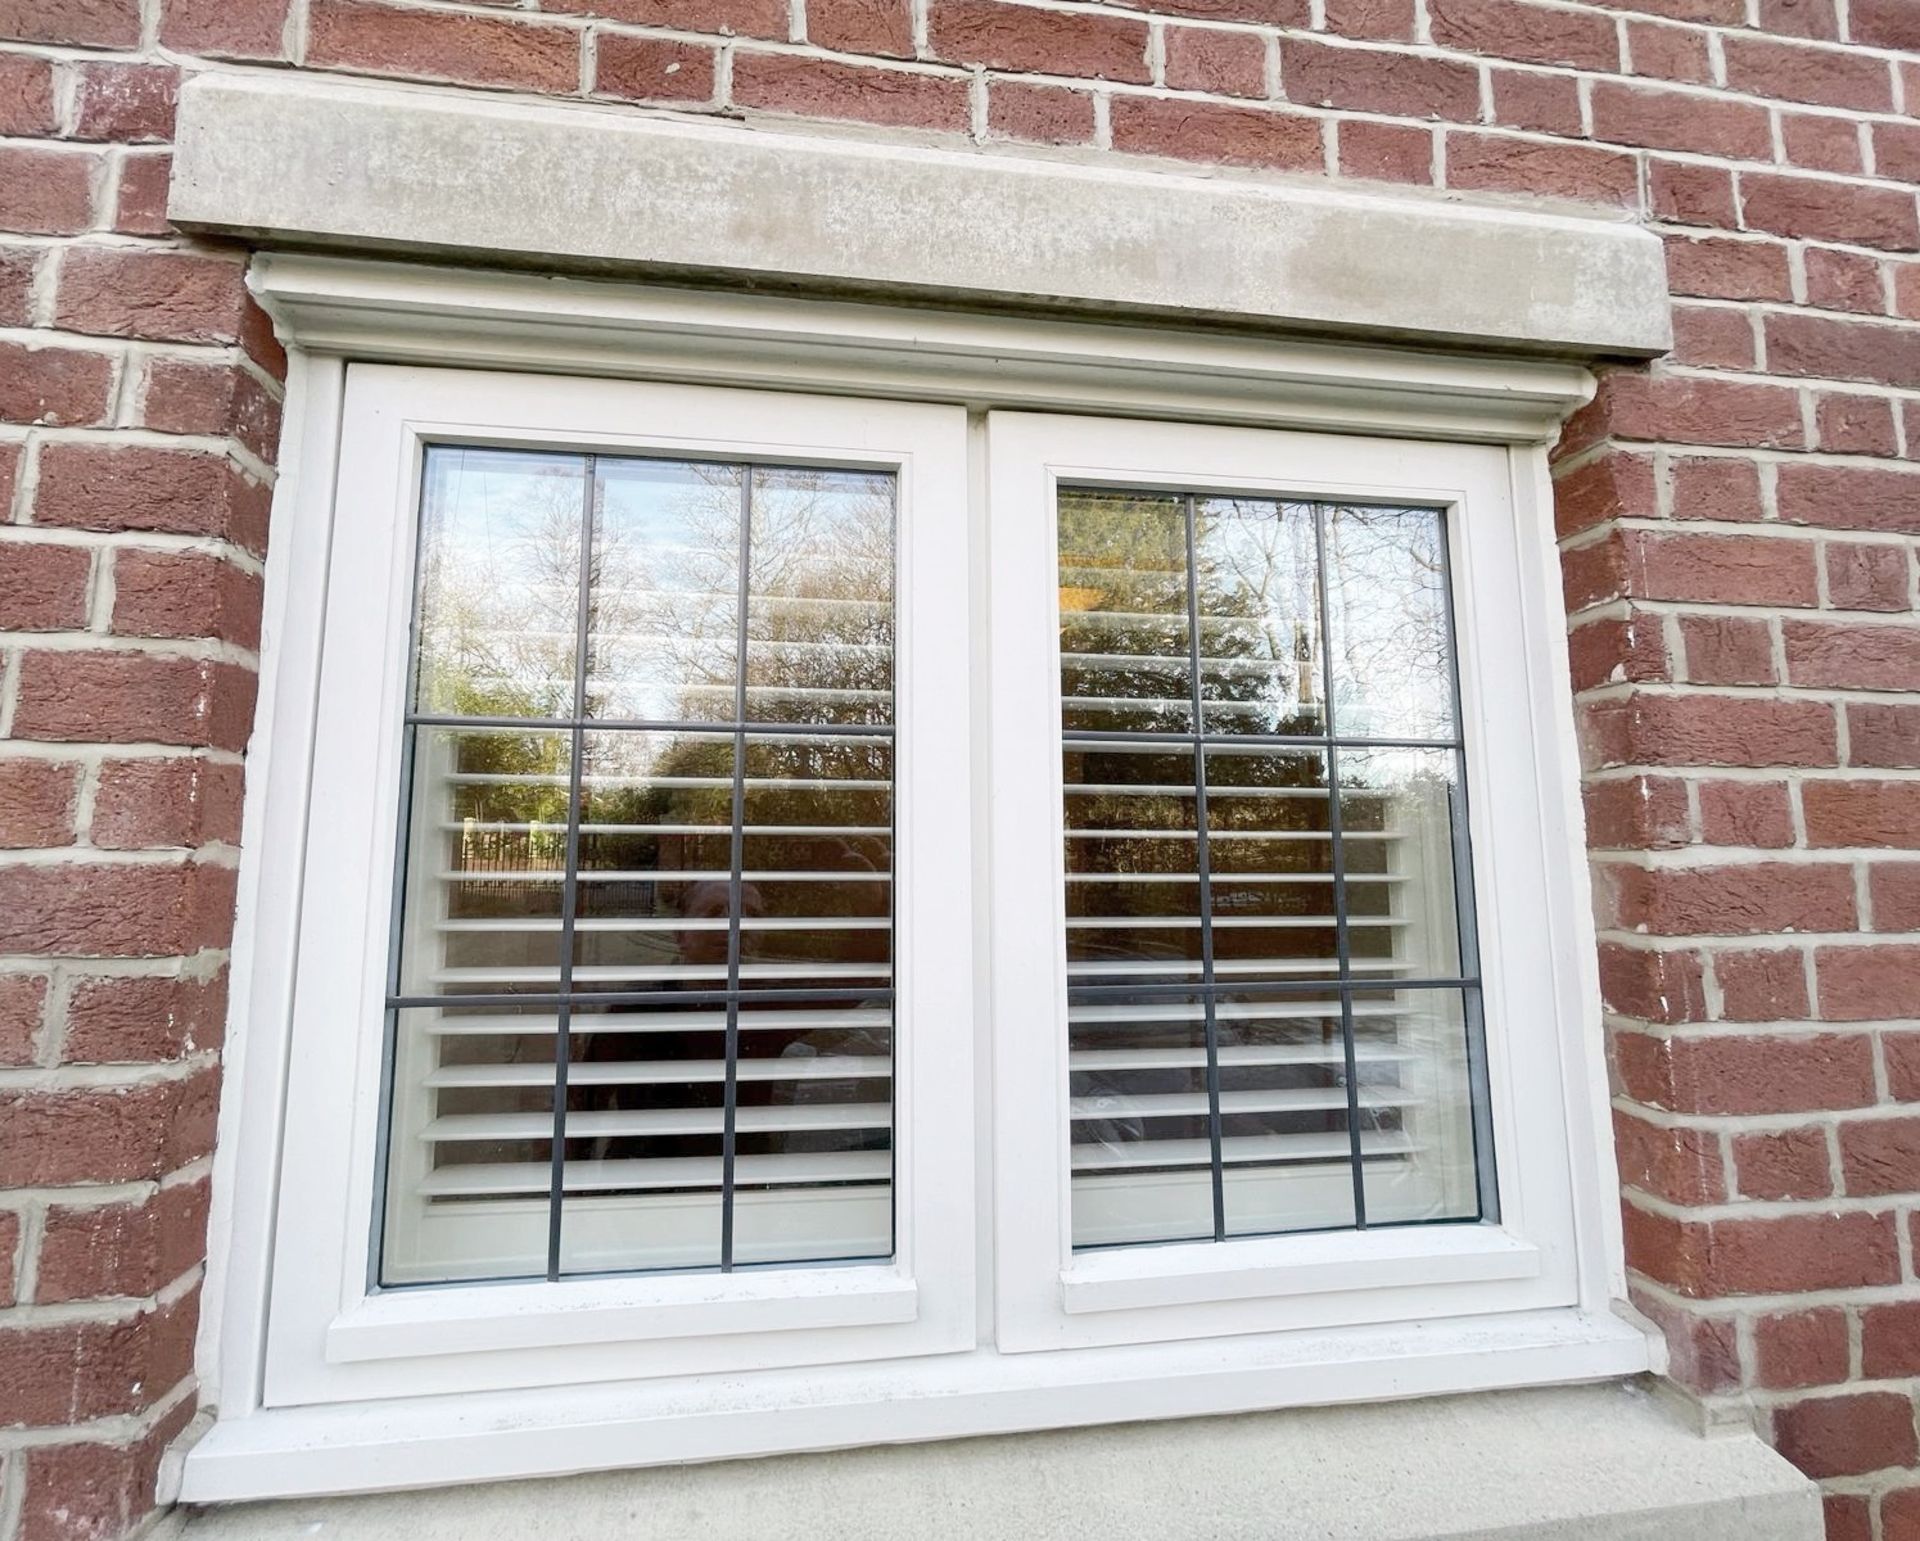 1 x Hardwood Timber Double Glazed Leaded 2-Pane Window Frame fitted with Shutter Blinds - NO VAT - Image 3 of 12